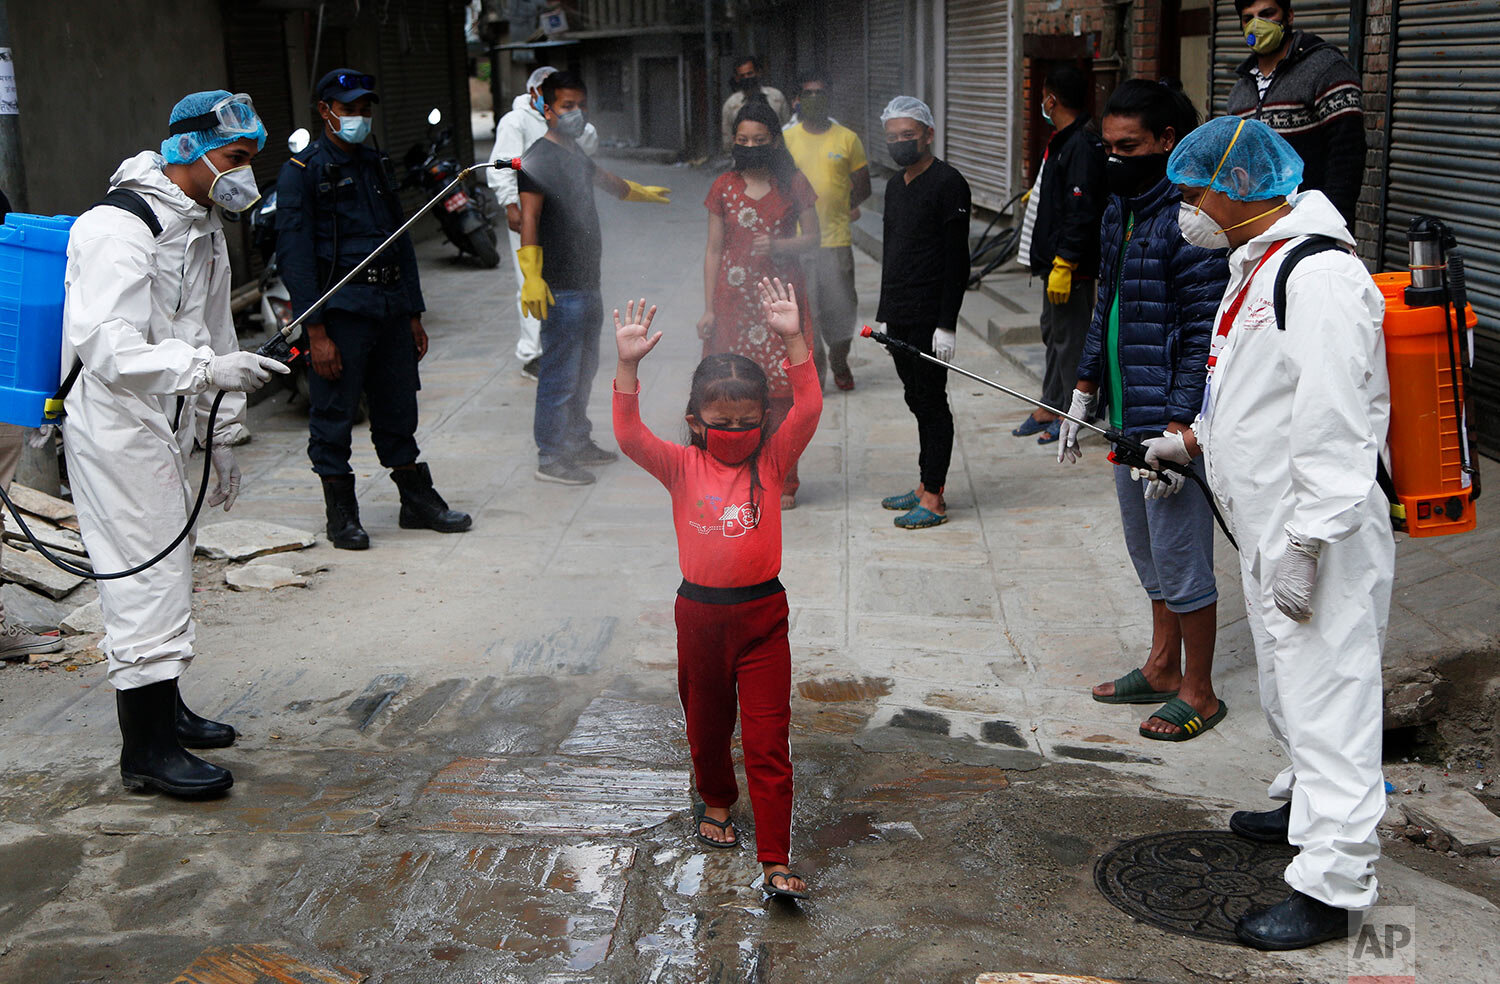  A young Nepalese girl is sprayed with disinfectants as she arrives to get free food distributed by social workers during a lockdown to control the spread of the new coronavirus in Kathmandu, Nepal, Sunday, May 3, 2020. (AP Photo/Niranjan Shrestha) 